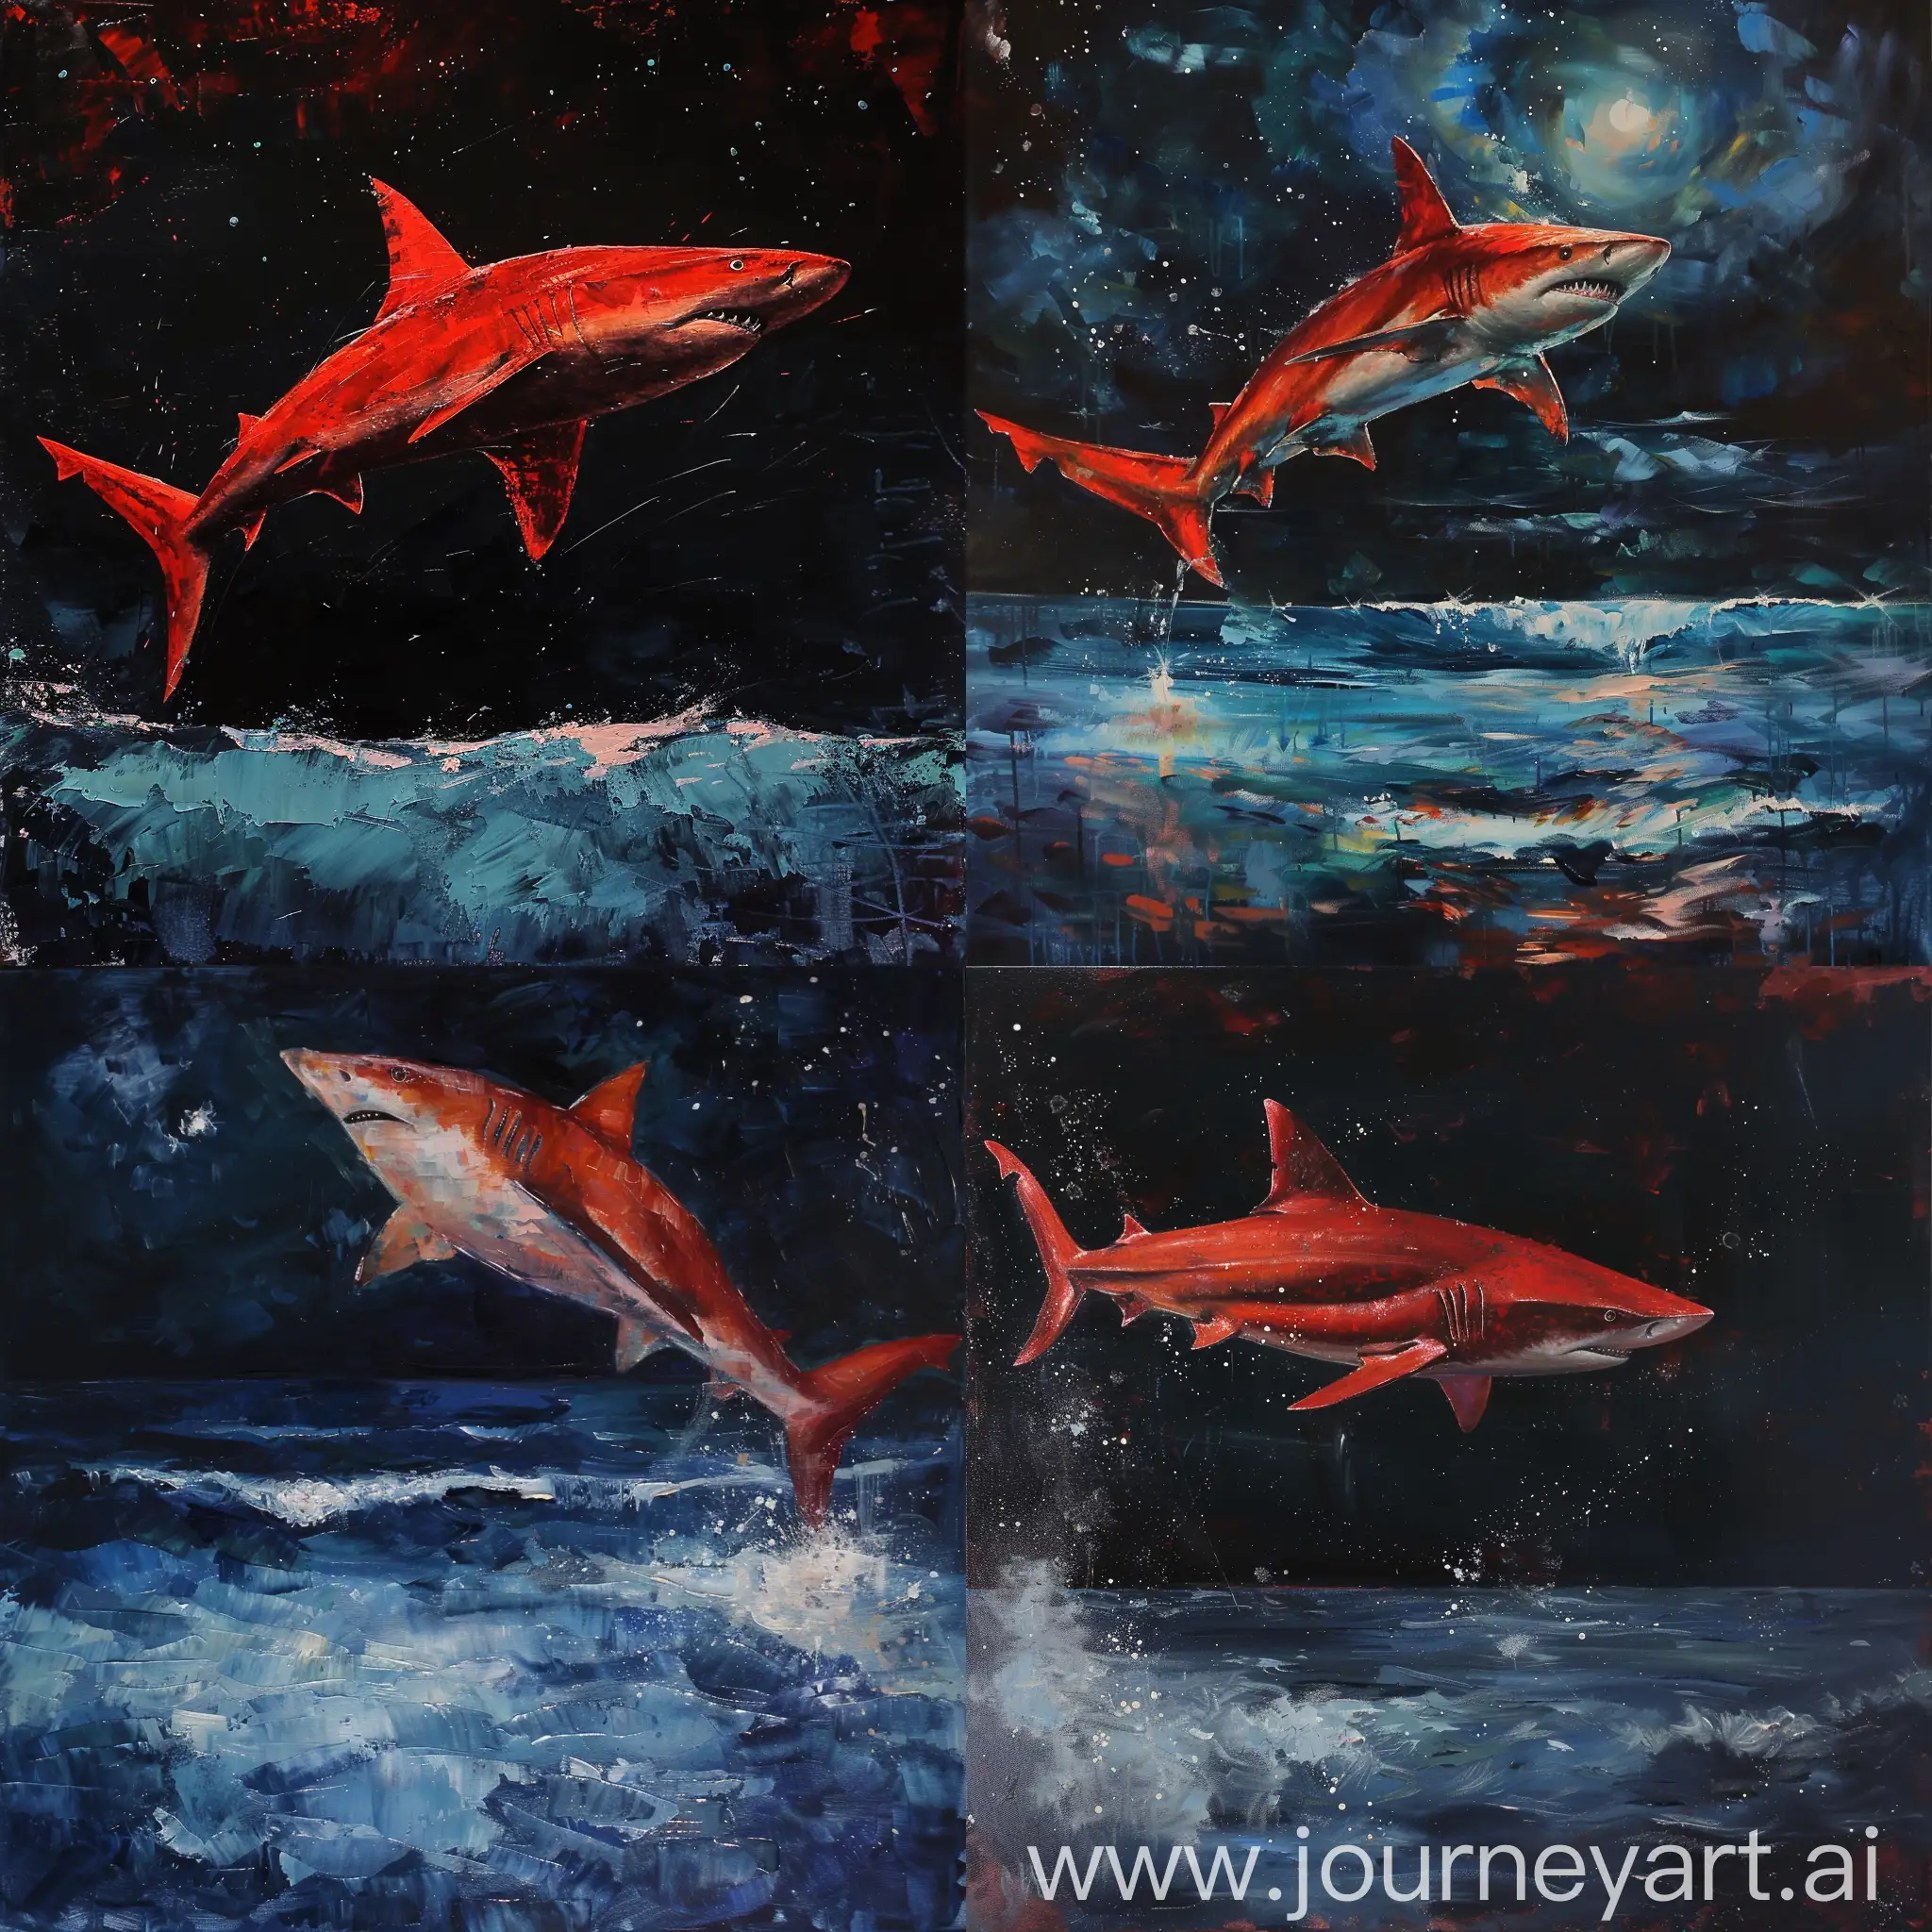 Majestic-Red-Shark-Leaping-from-Endless-Ocean-in-Dreamy-Dark-Night-Oil-Painting